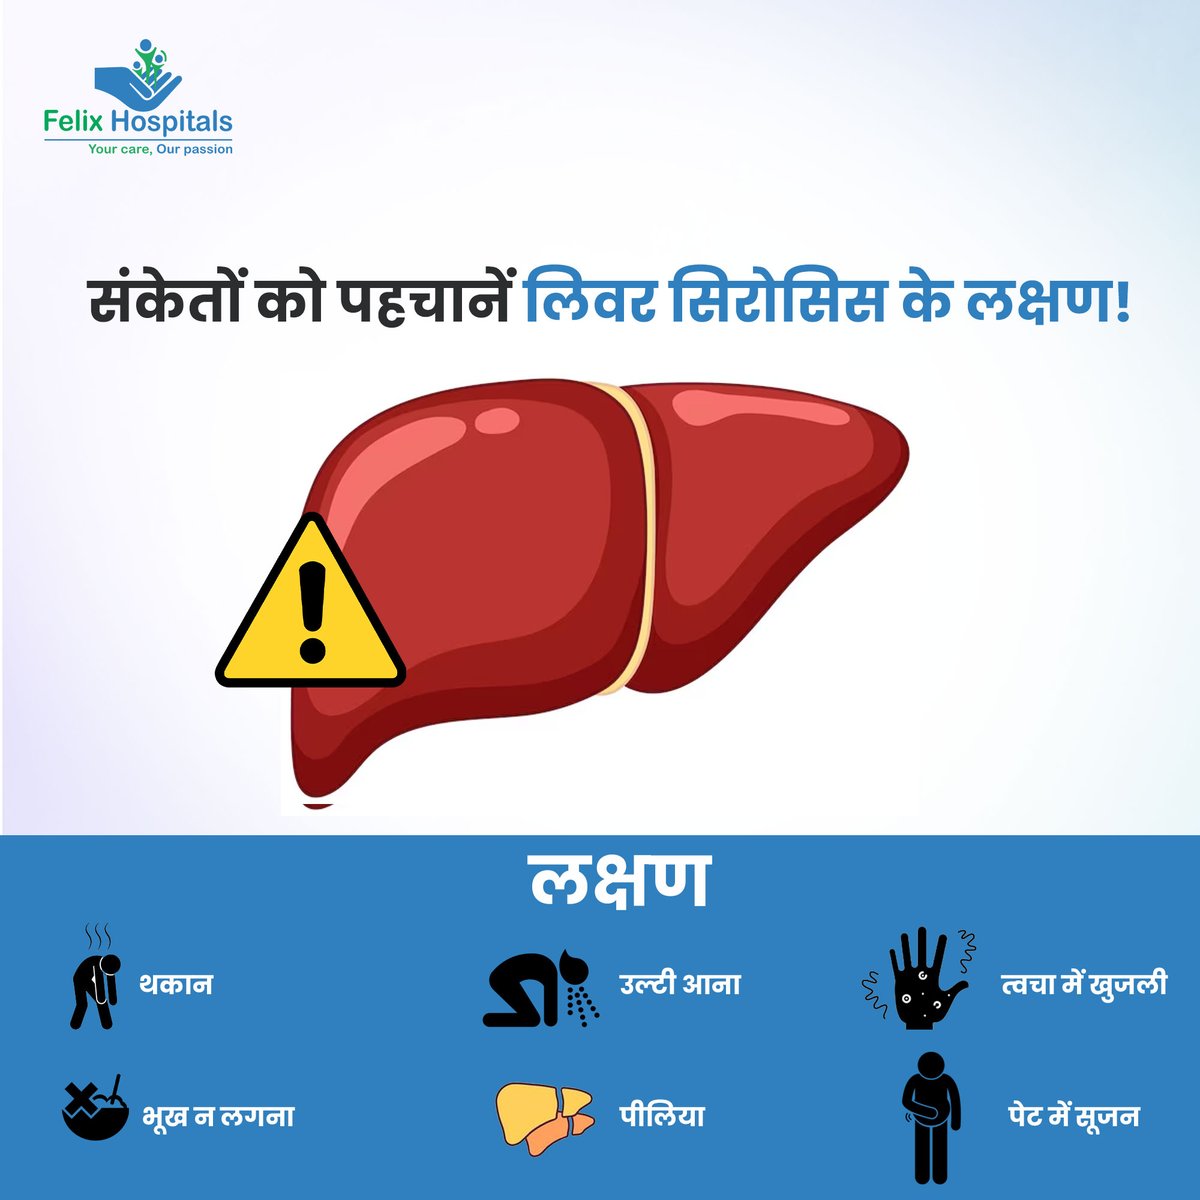 Don't ignore these subtle signs. Early detection is key to managing liver cirrhosis effectively. Stay vigilant, listen to your body's cues, and consult a doctor promptly if you experience any of these symptoms. #LiverCirrhosisAwareness #HealthyLiver #SilentSymptoms #liver